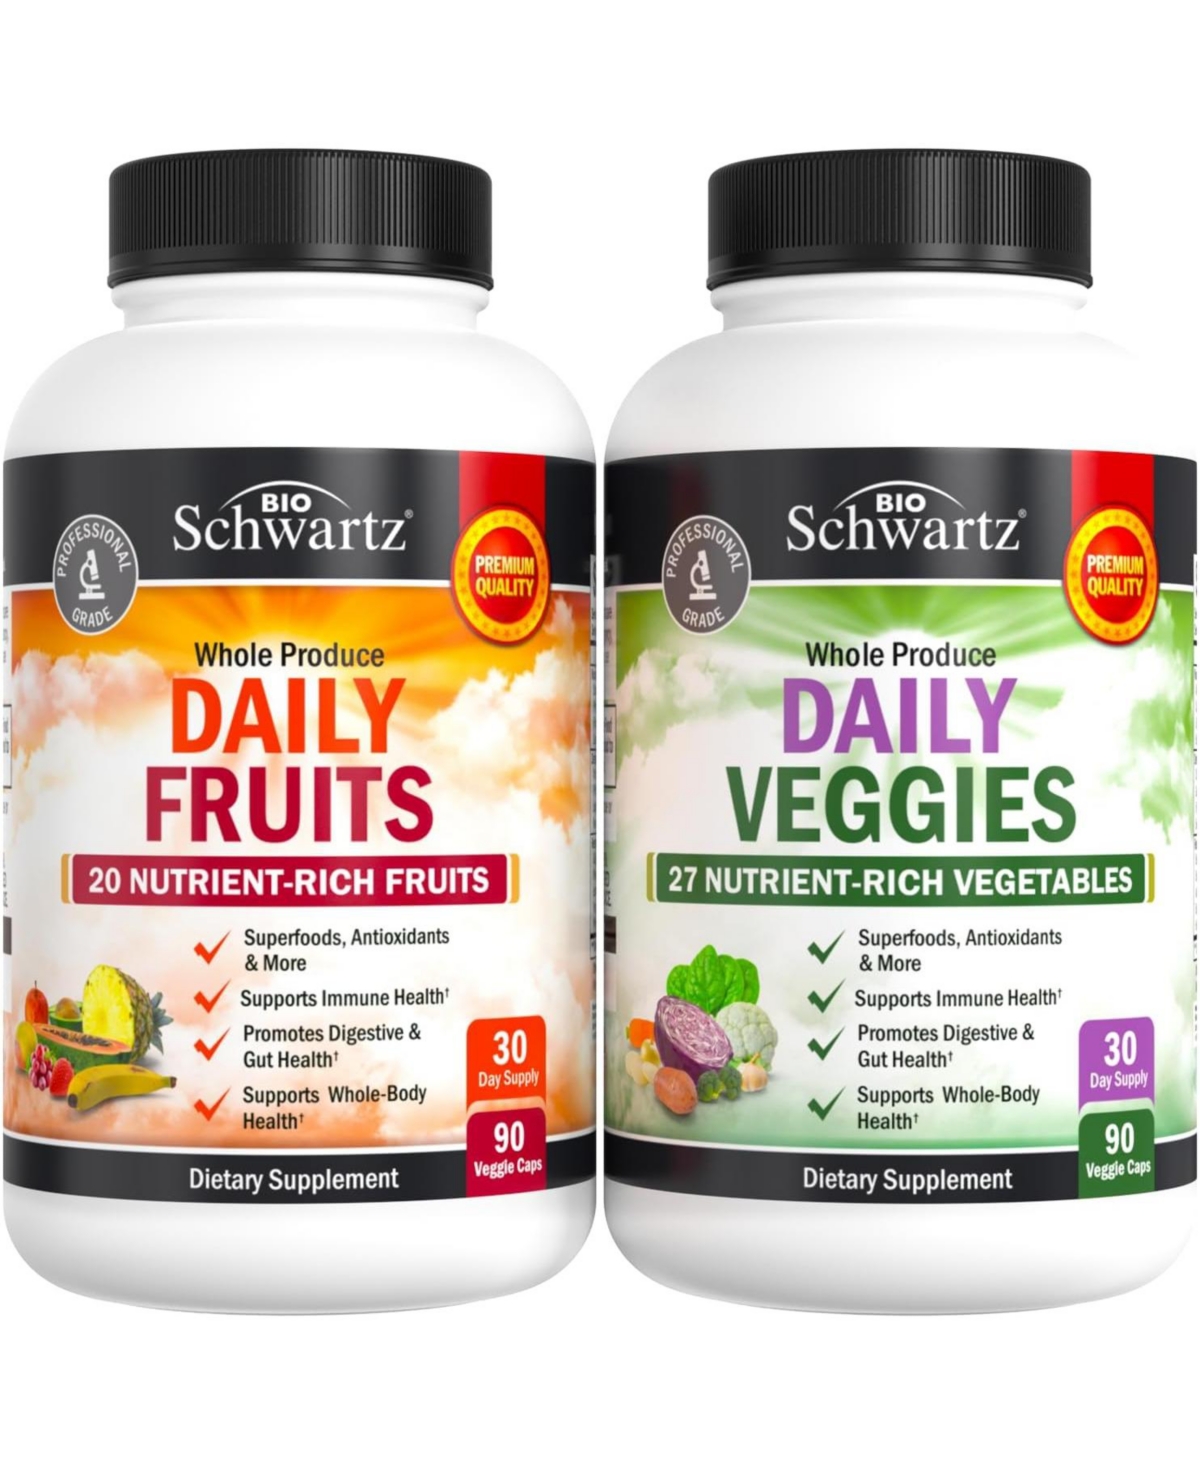 Daily Fruits & Veggies Supplement - 47 Whole Foods - Vitamins, Minerals, Lycopene, 90ct